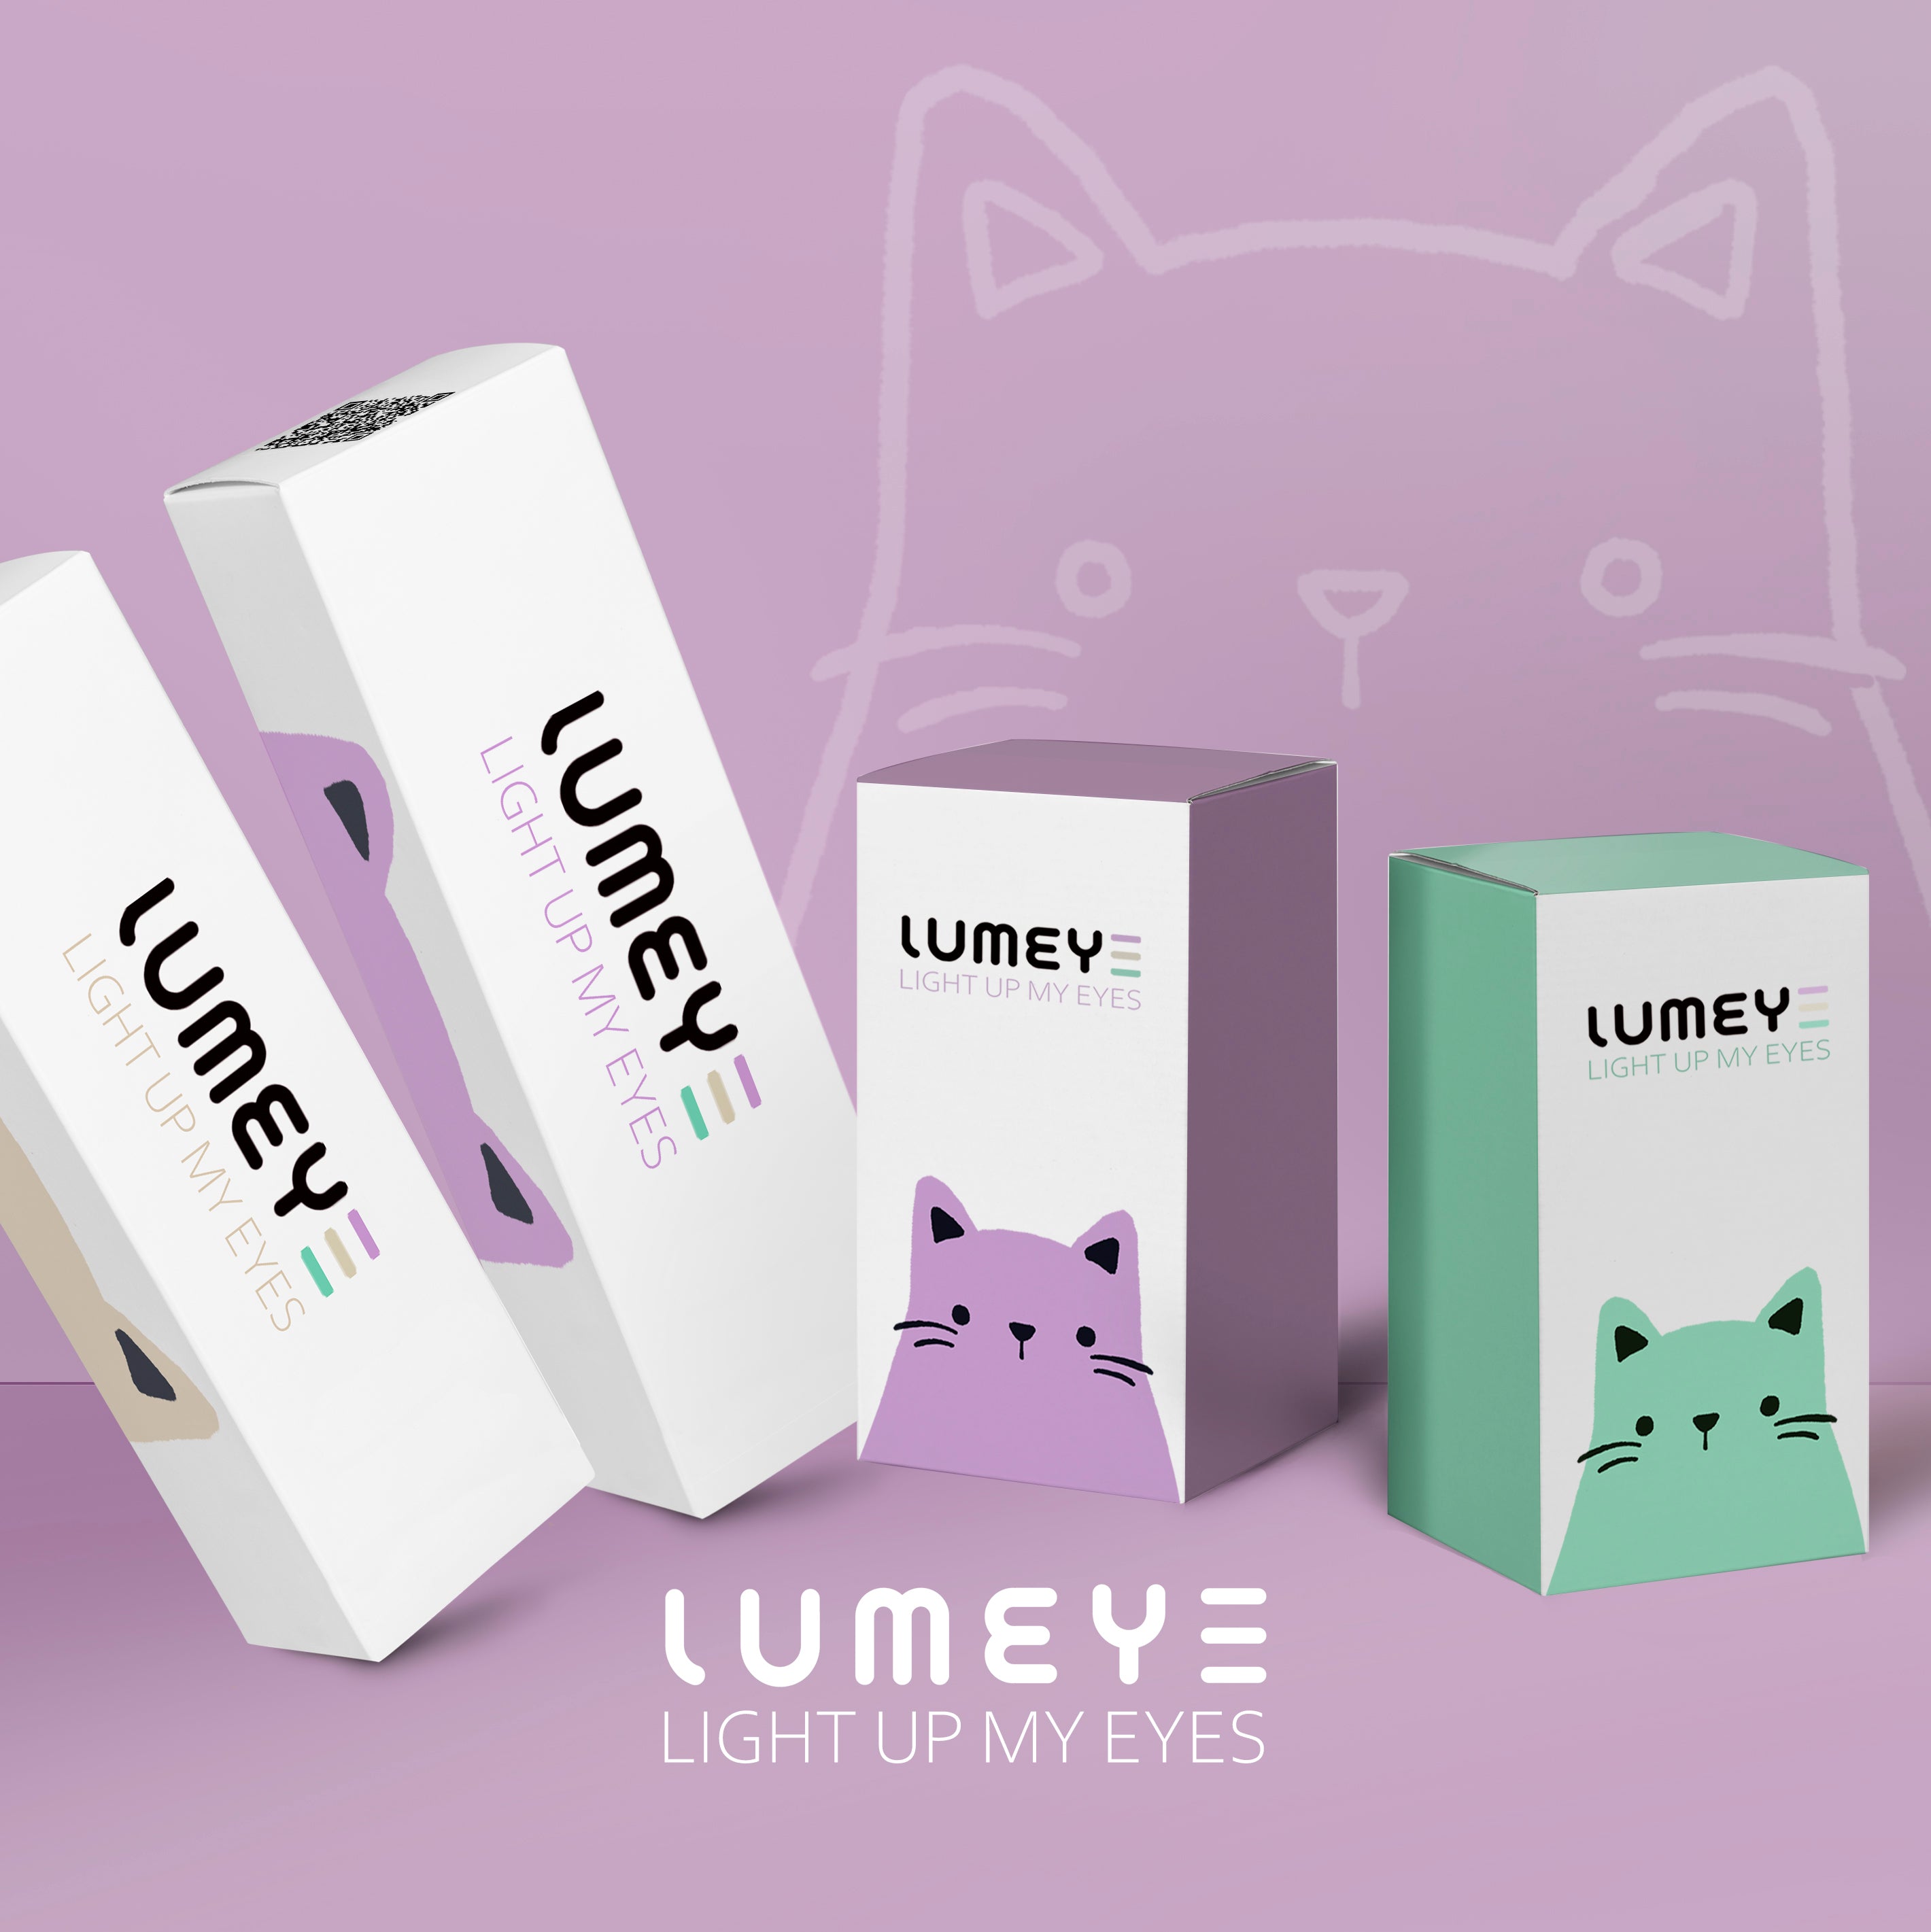 Best COLORED CONTACTS - LUMEYE Glowing Sunset Green Colored Contact Lenses - LUMEYE